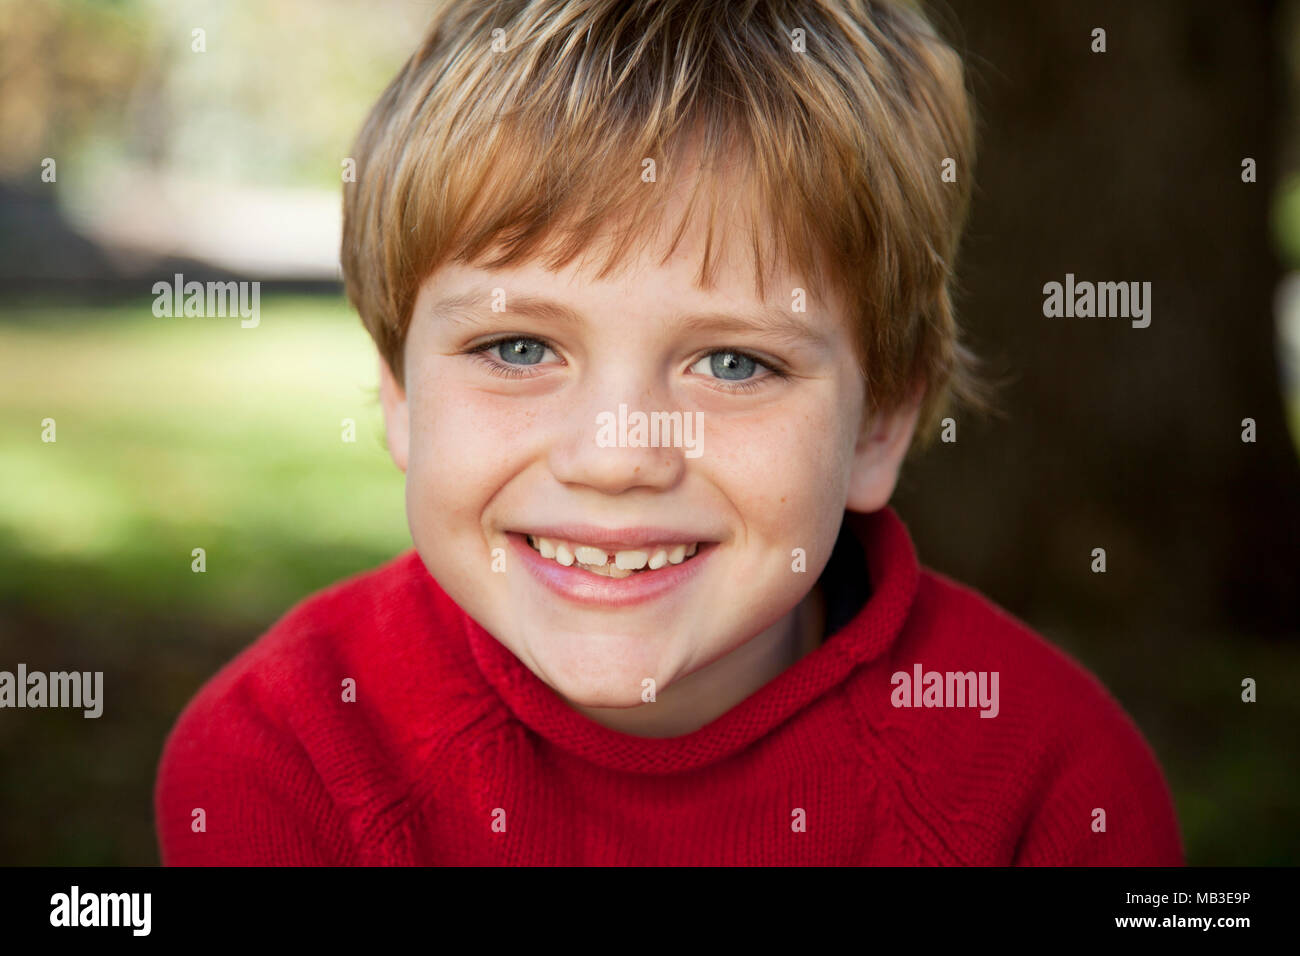 Blonde Boy with Glasses Smiling - wide 6